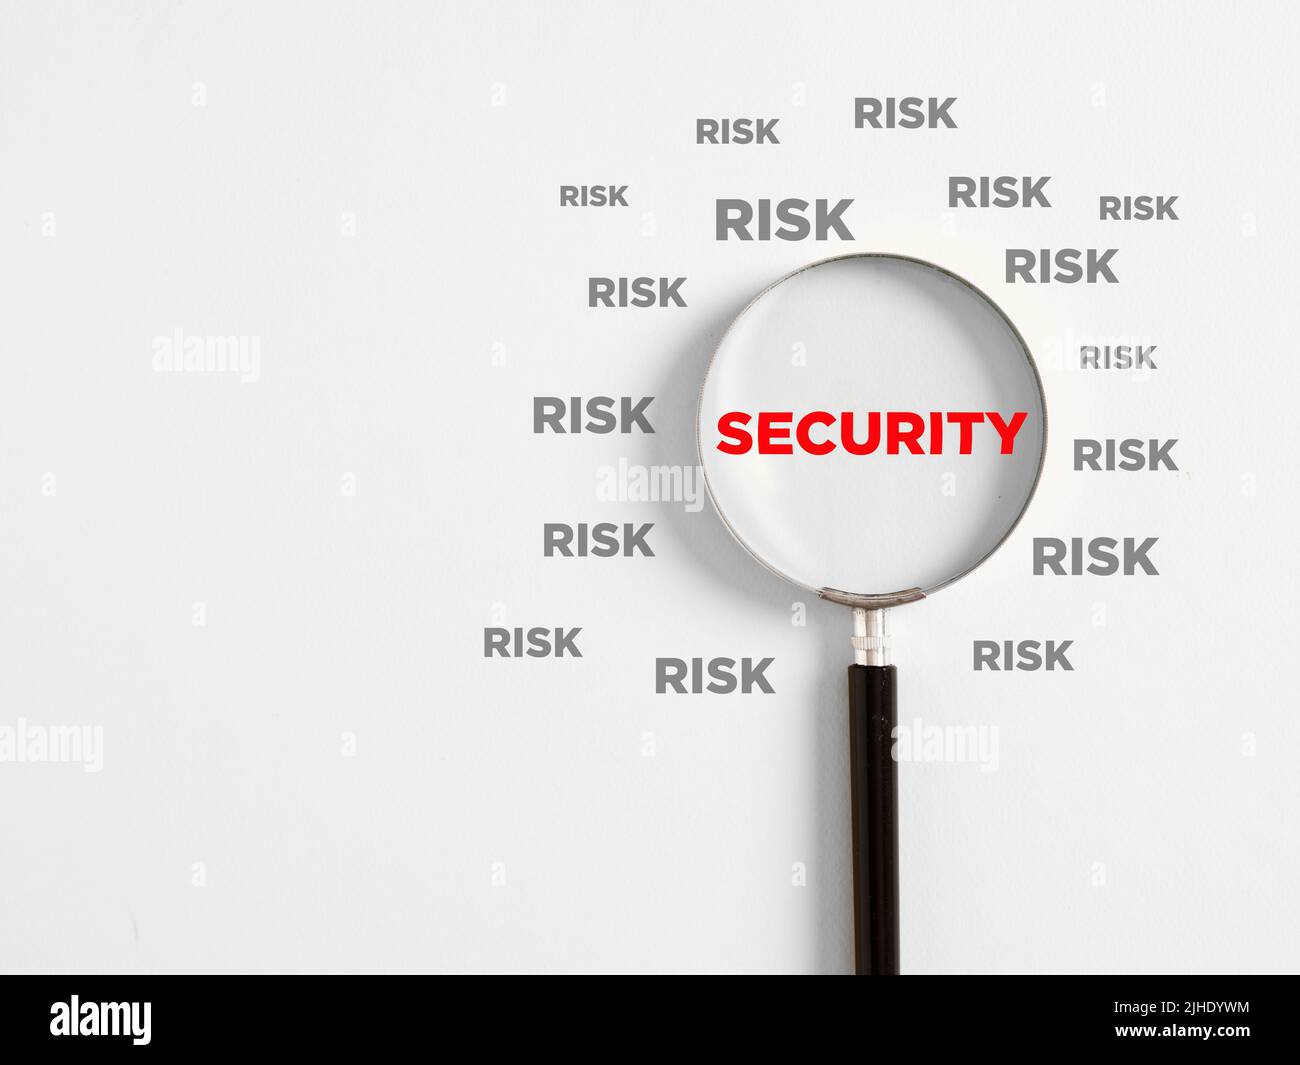 Business risks and security concept. Secure business environment and security assessment. Magnifying glass magnifies the word security surrounded with Stock Photo